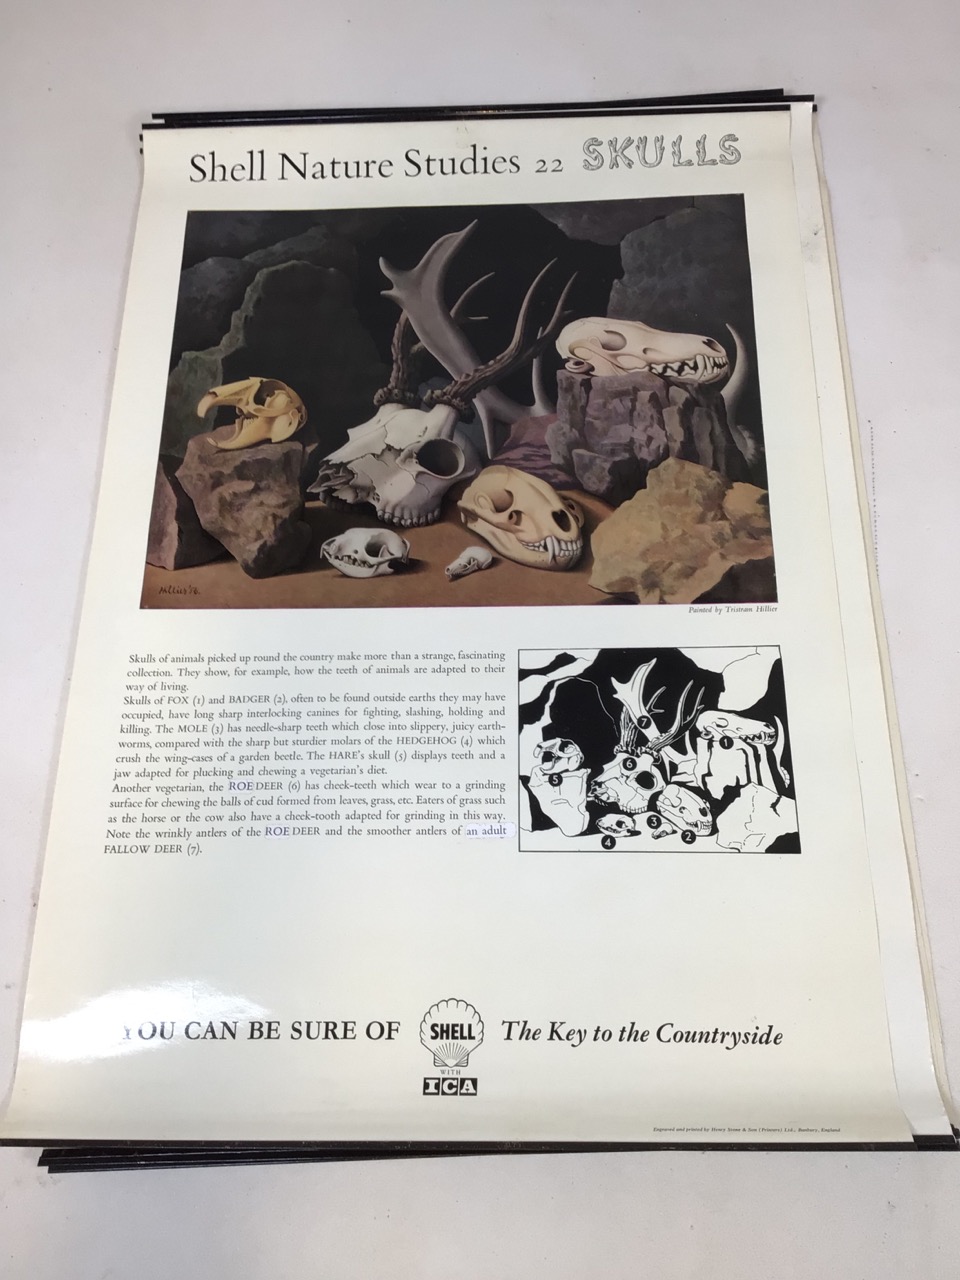 Shell Nature Studies vintage mid century Educational wildlife posters, printed by Henry Stone & Son. - Image 7 of 14